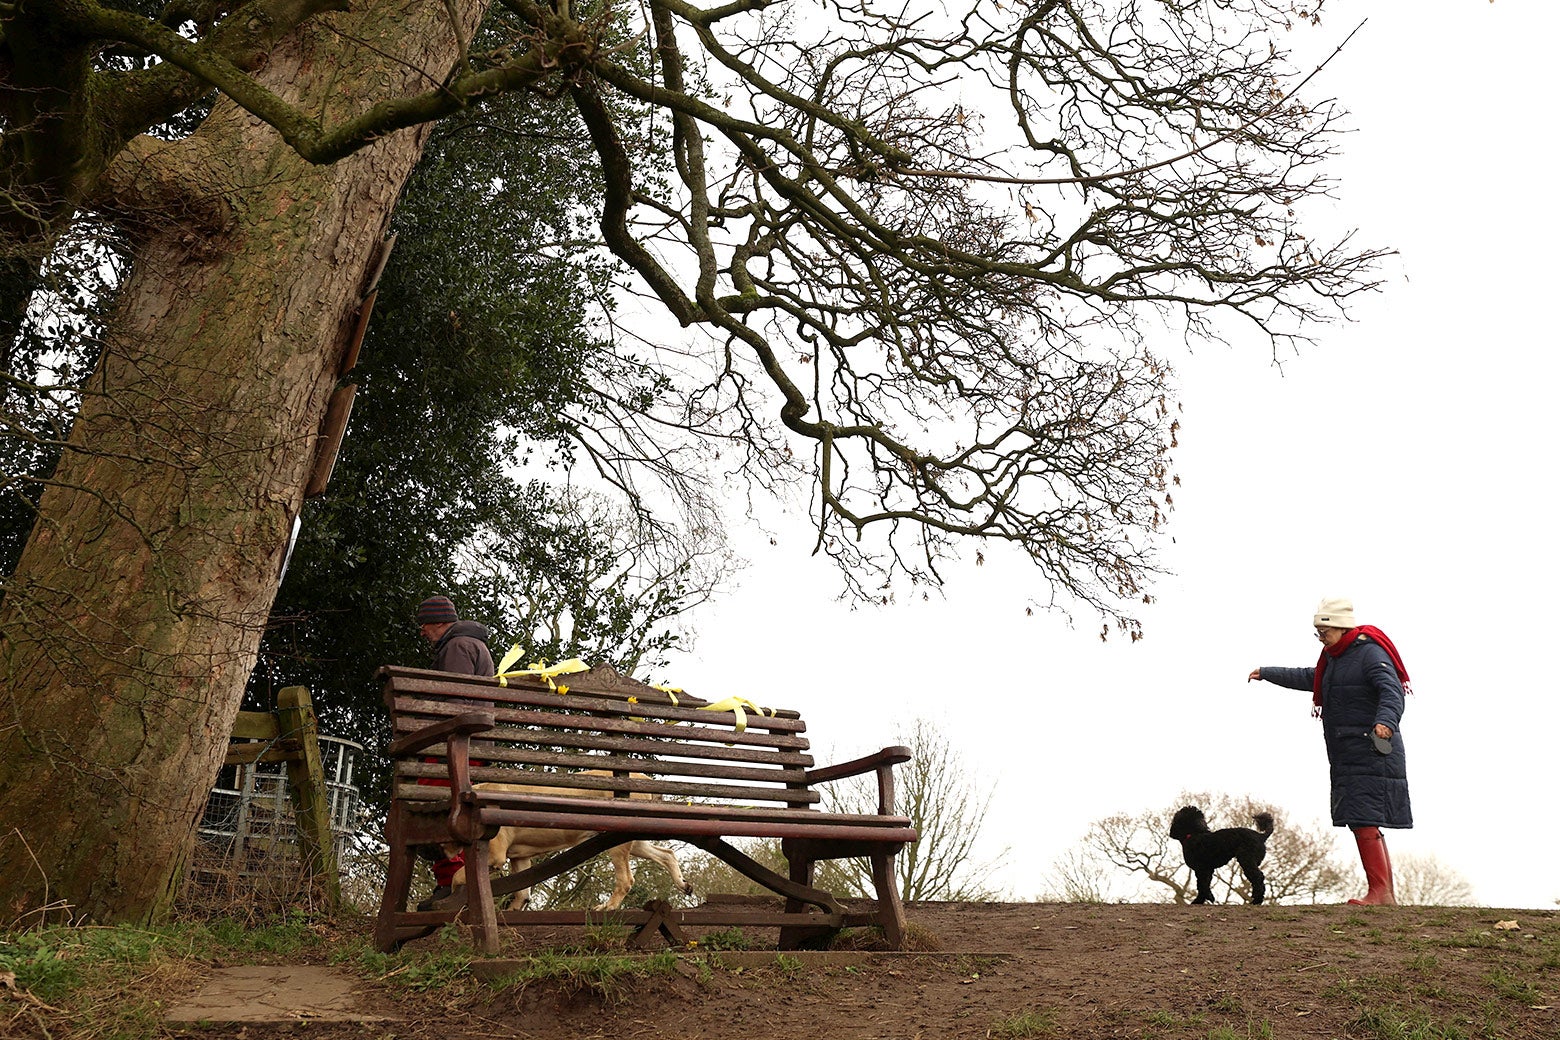 A dog walker passes by the bench near a very old tree.